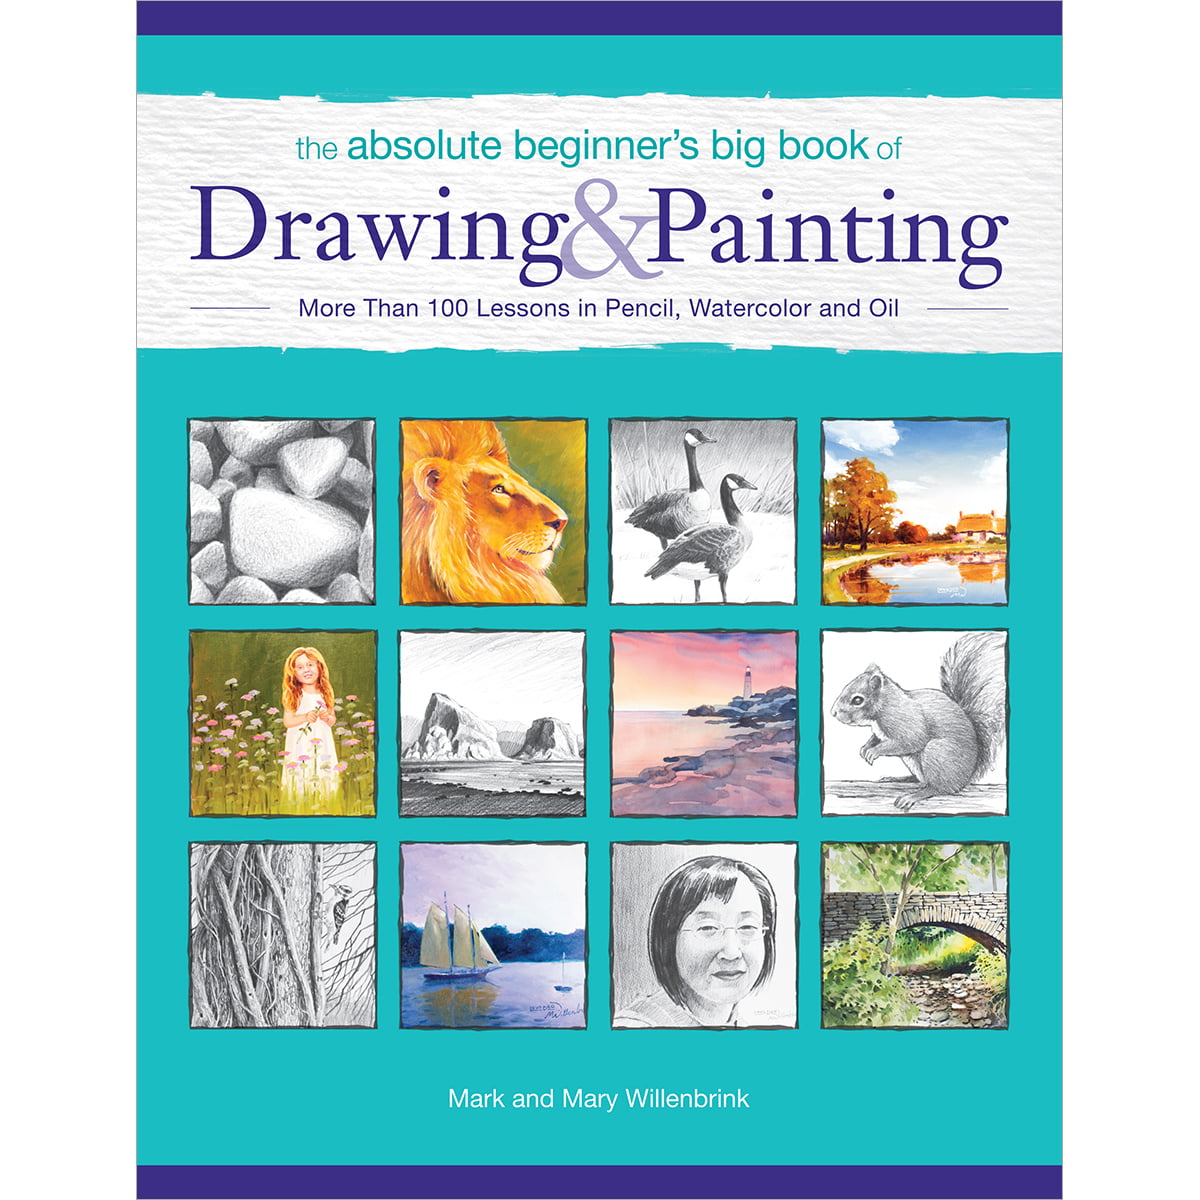 published 8 books of drawings and paintings